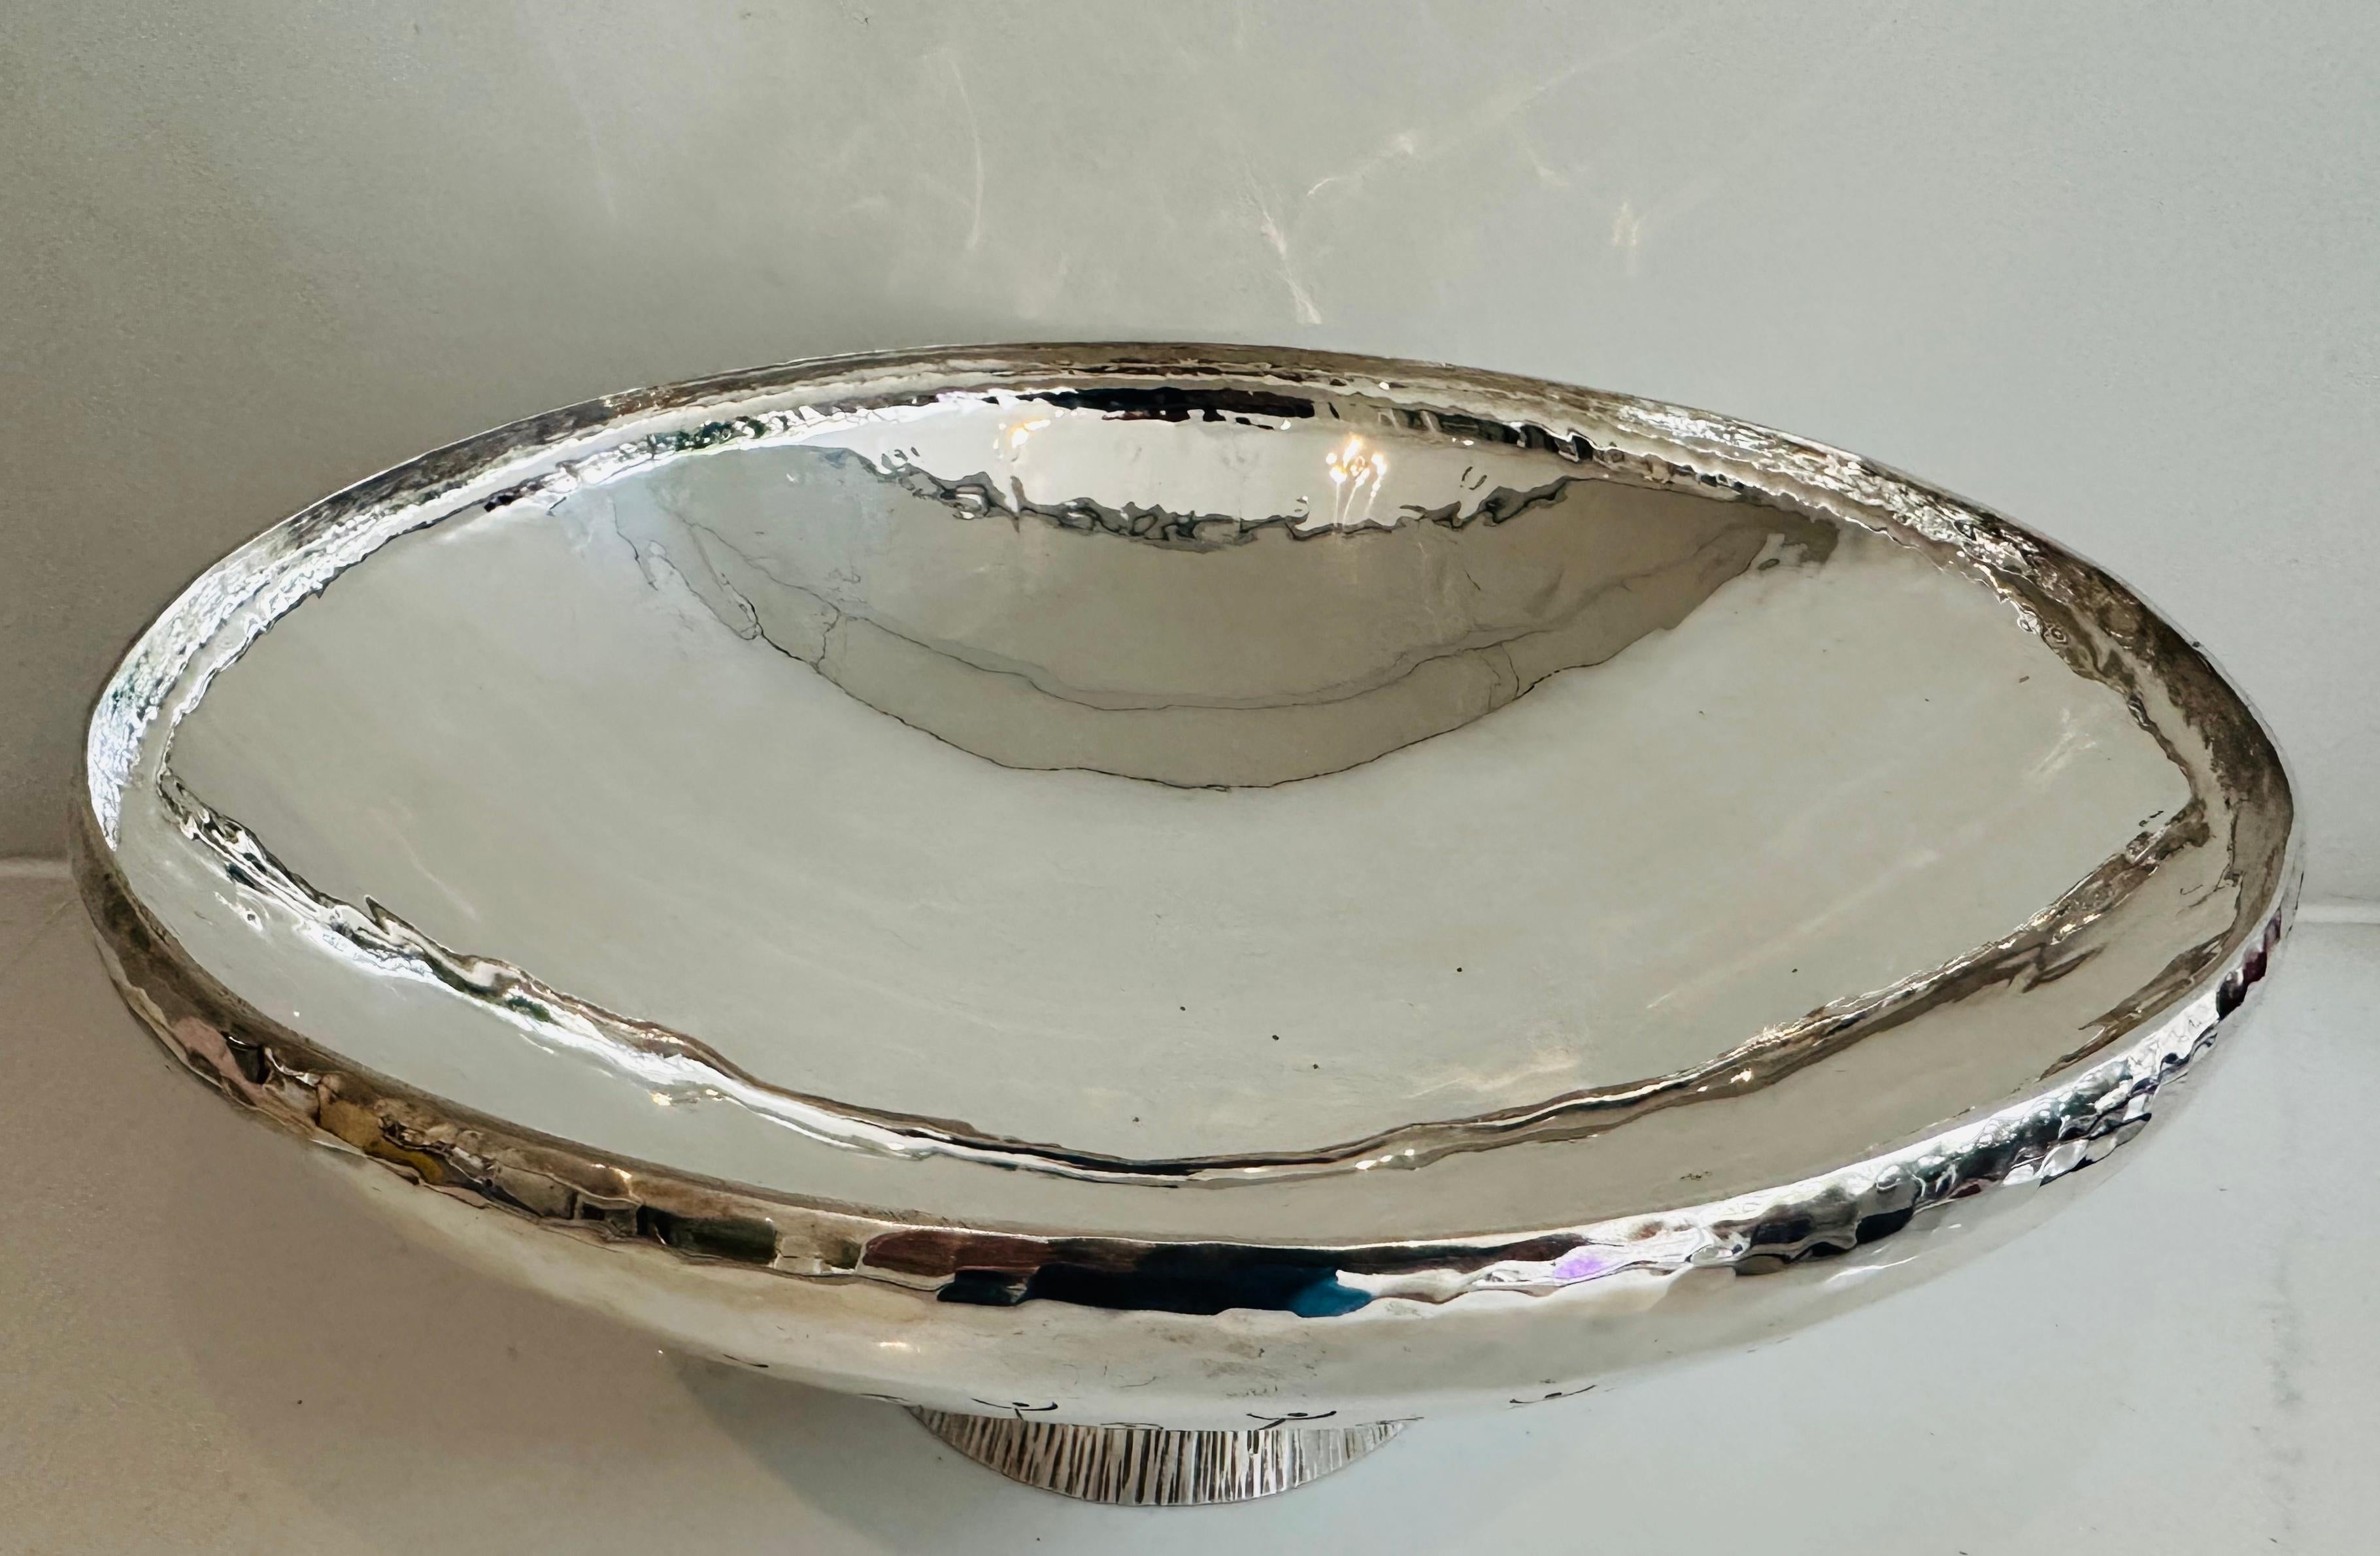 1980s English Silver Plated Decorative Hand-Hammered Serving or Display Bowl 5